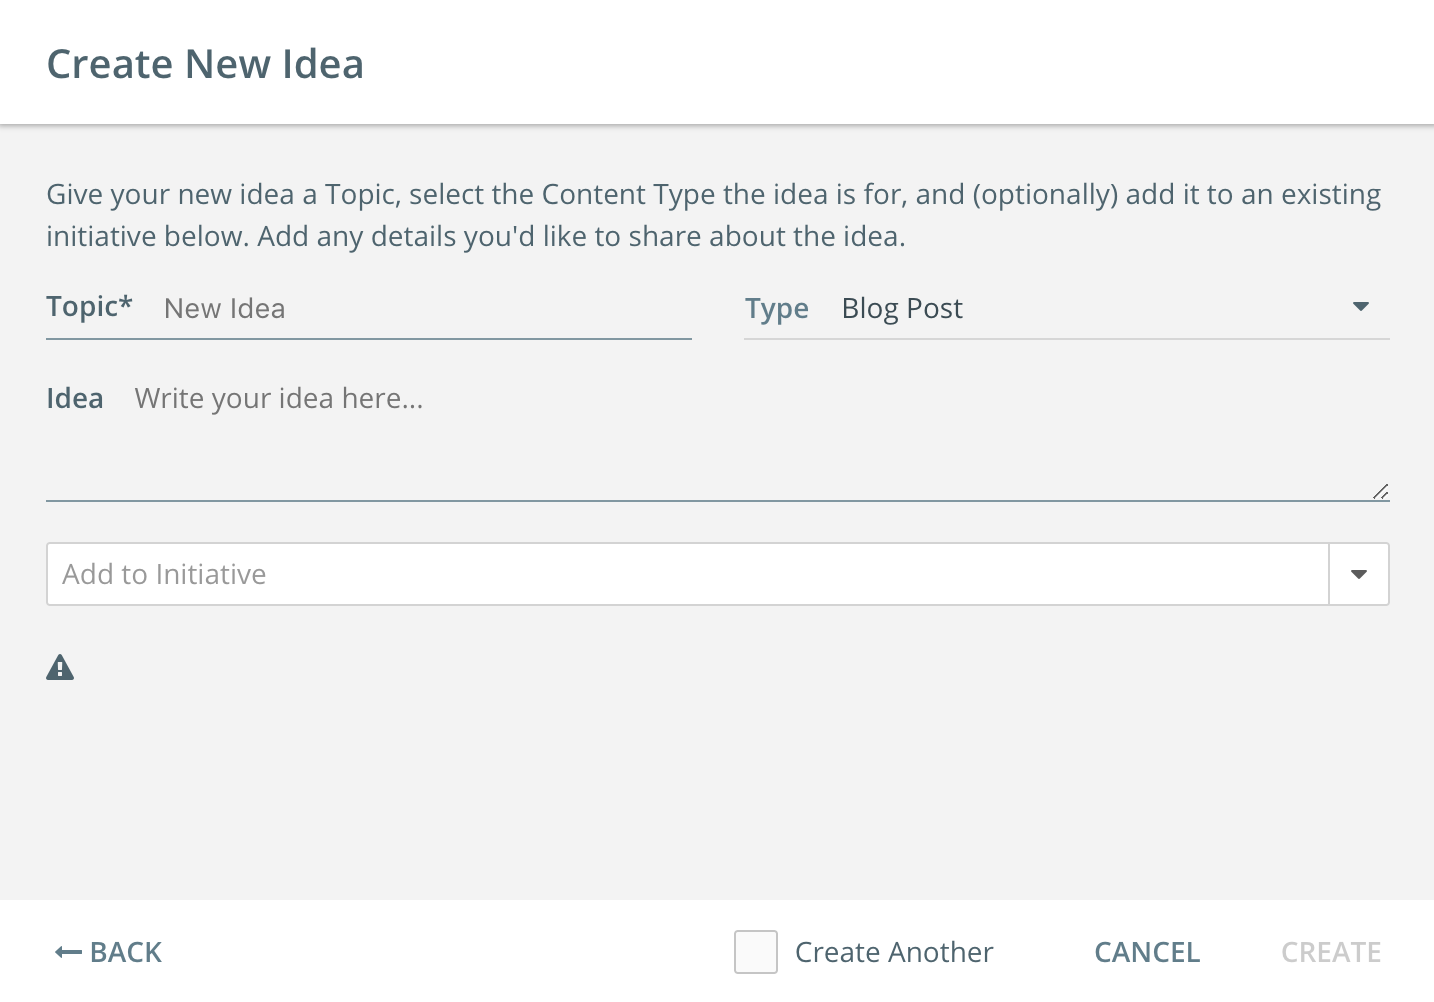 Ideation is a crucial part of your content marketing workflow template.